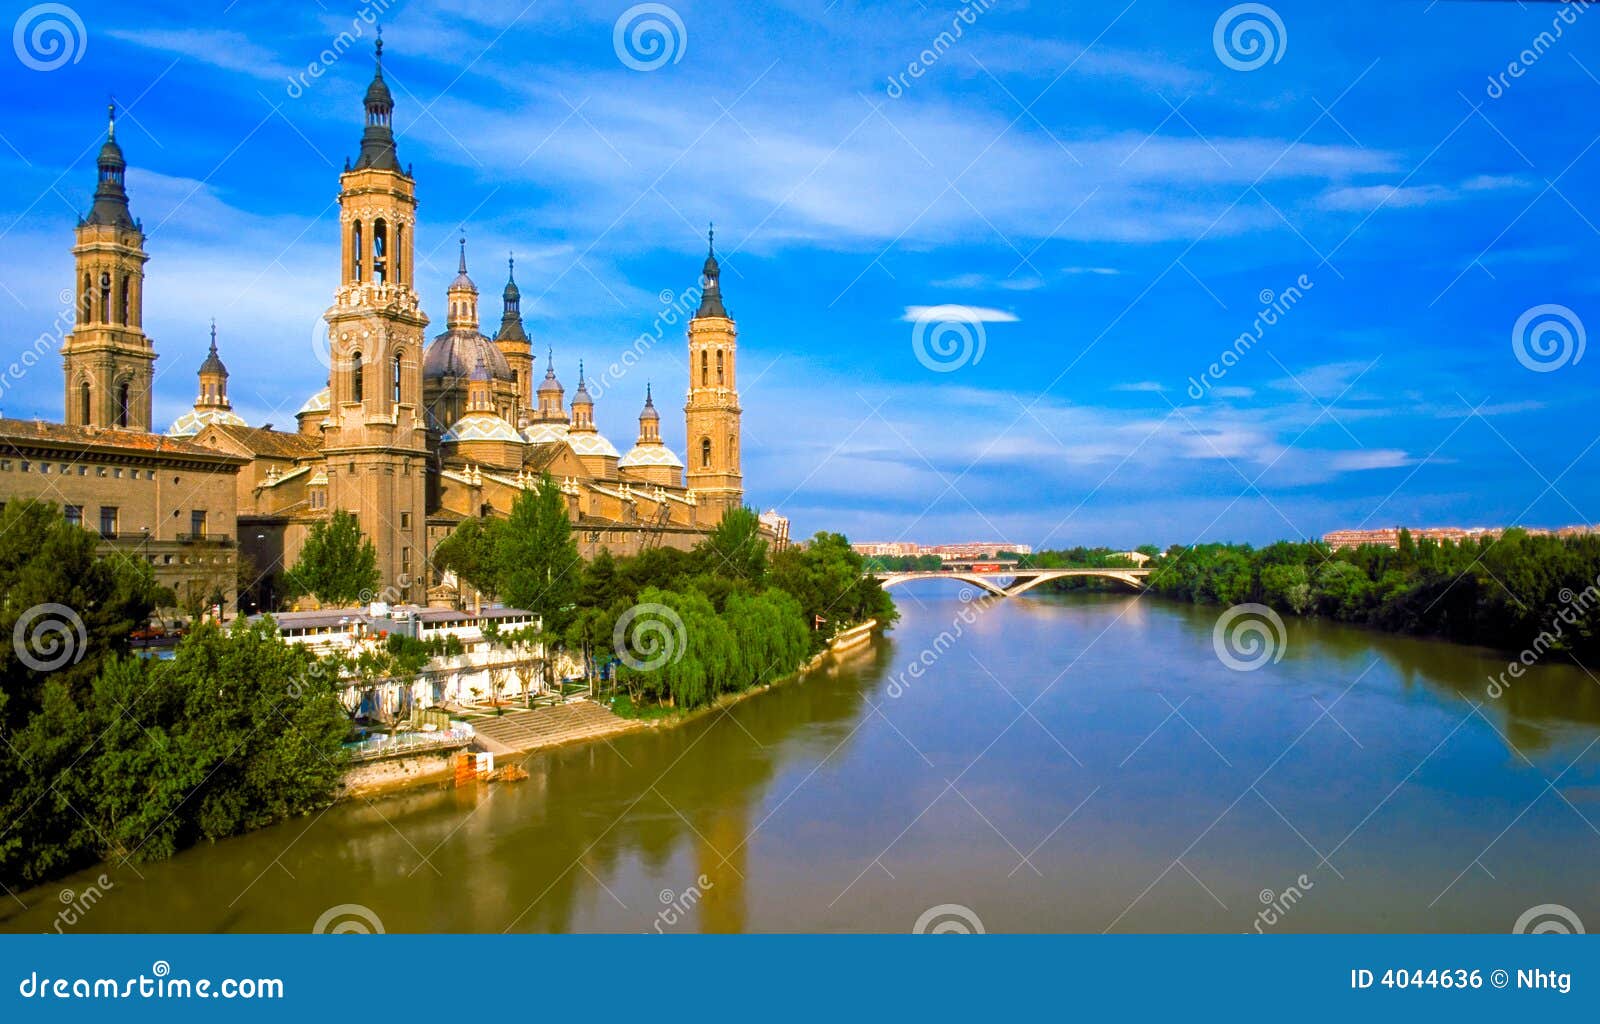 pilar's cathedral and ebro river